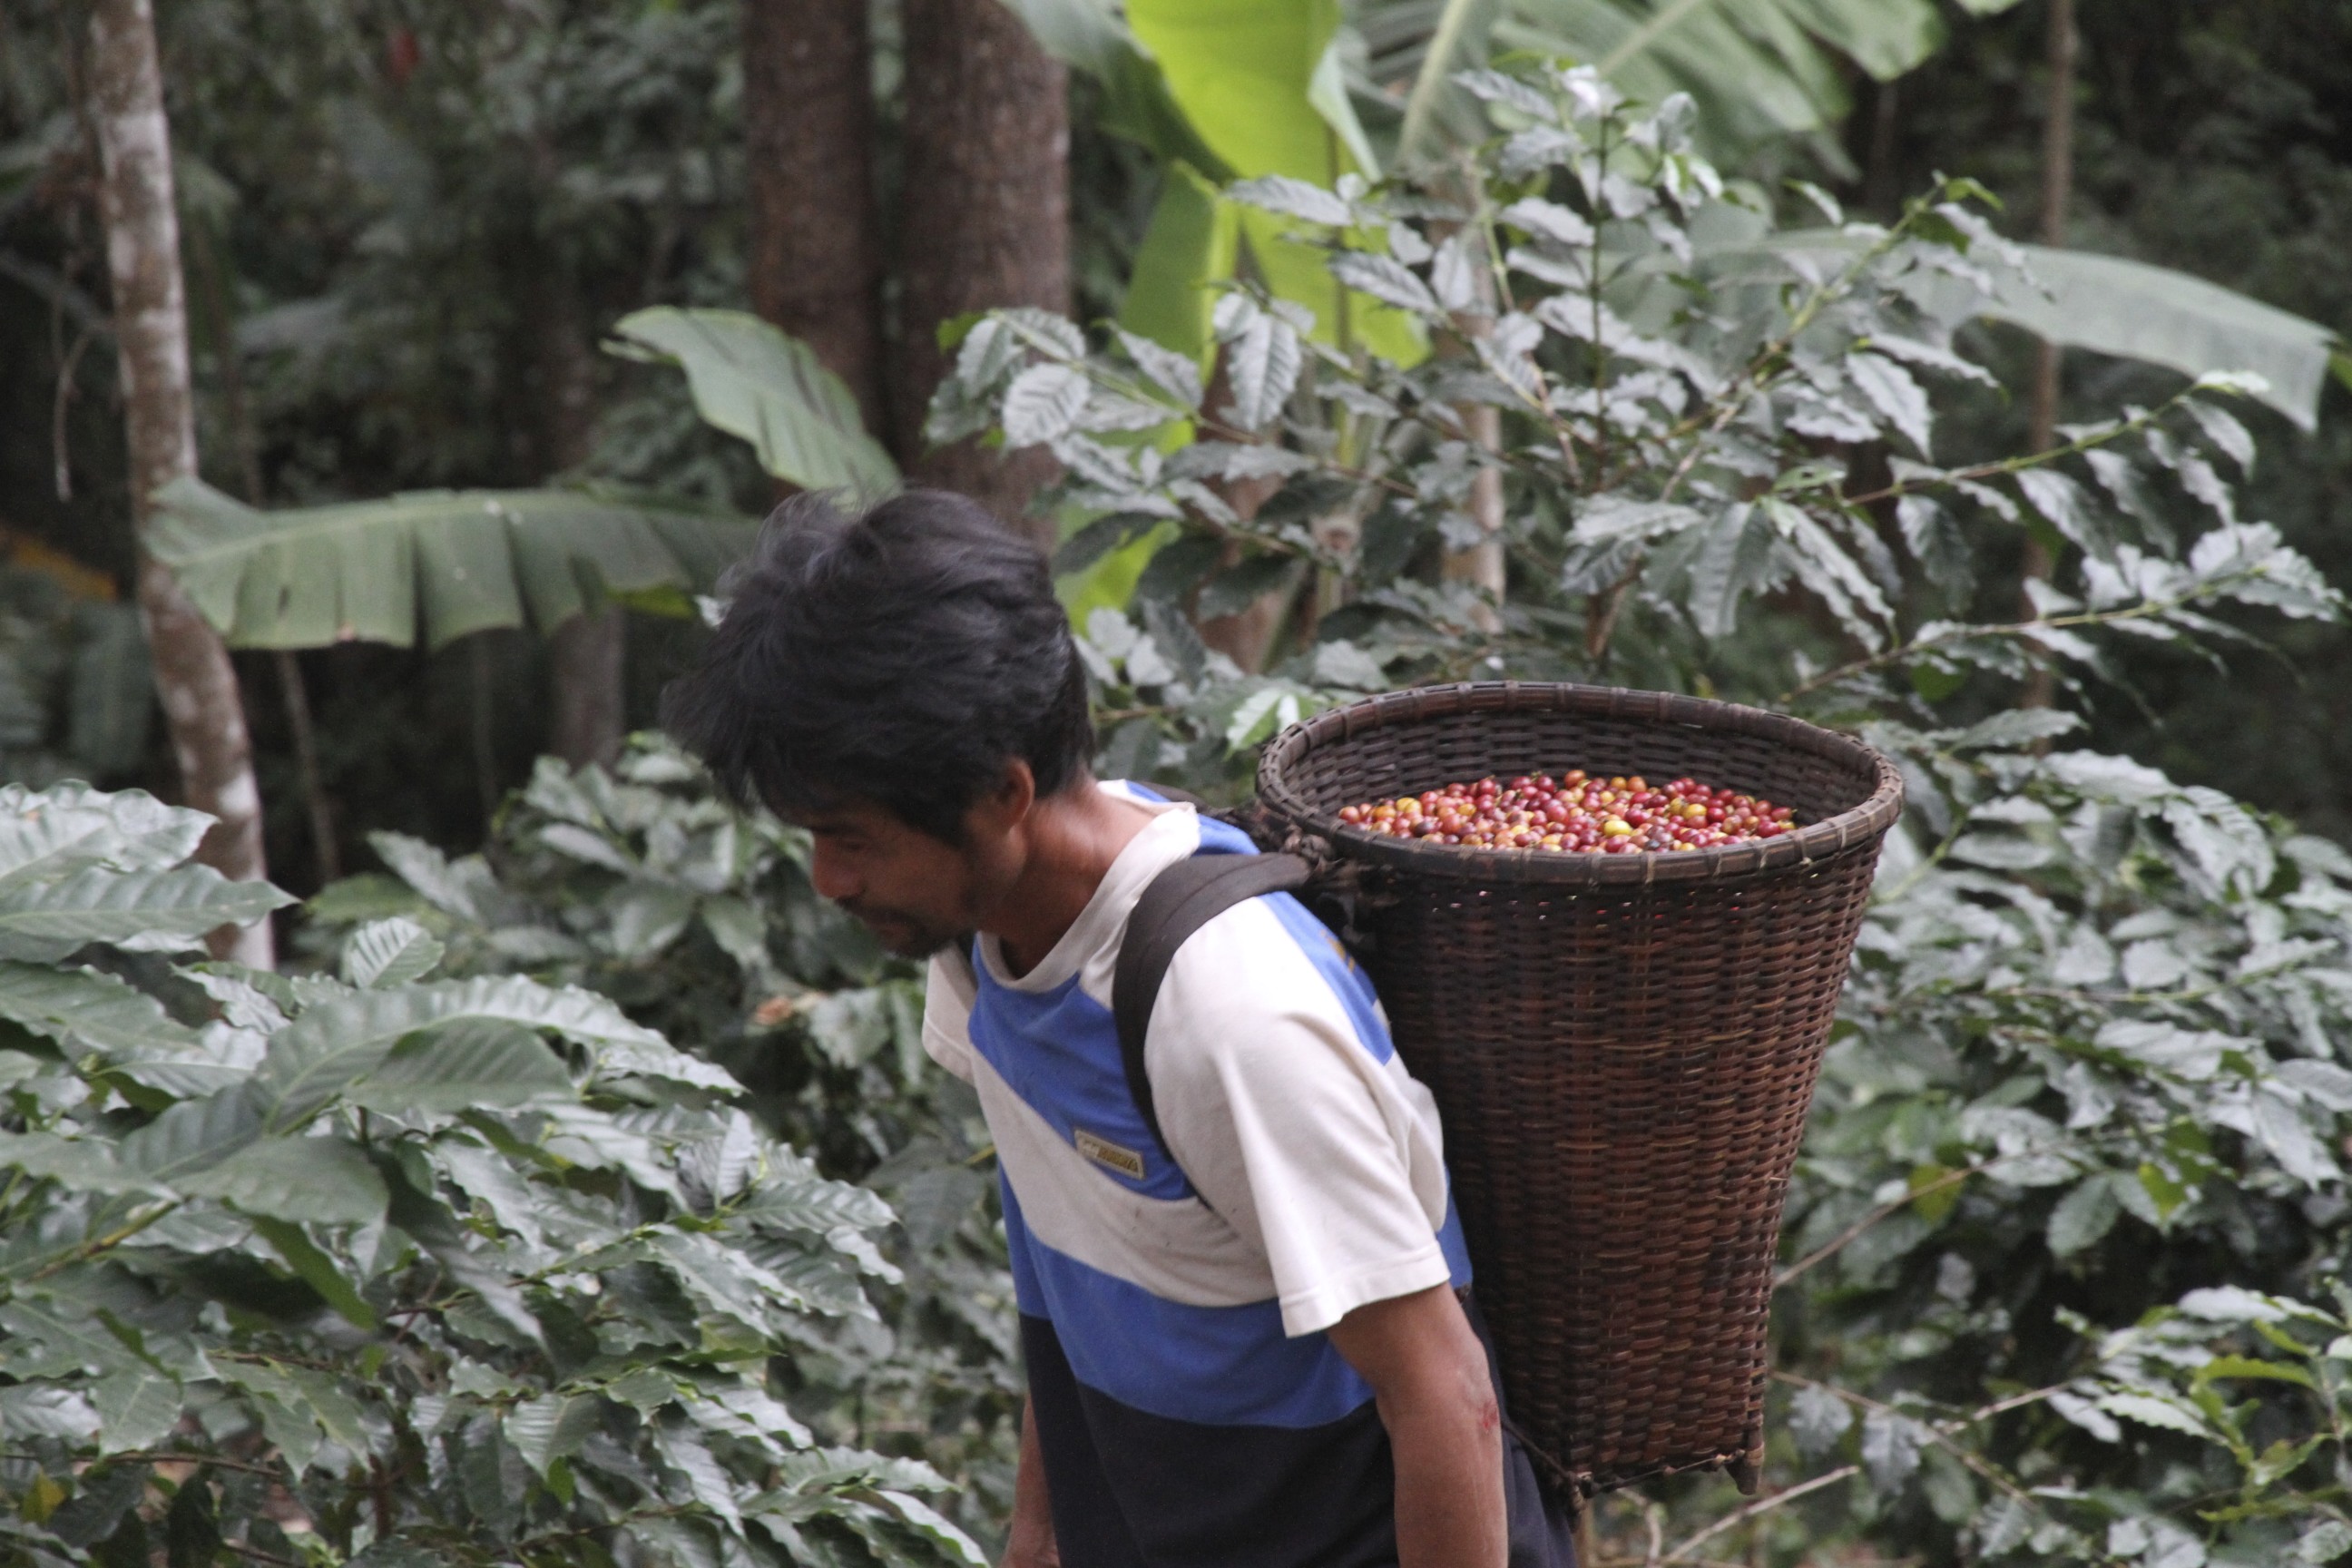 Coffee Training Day Held for Villagers